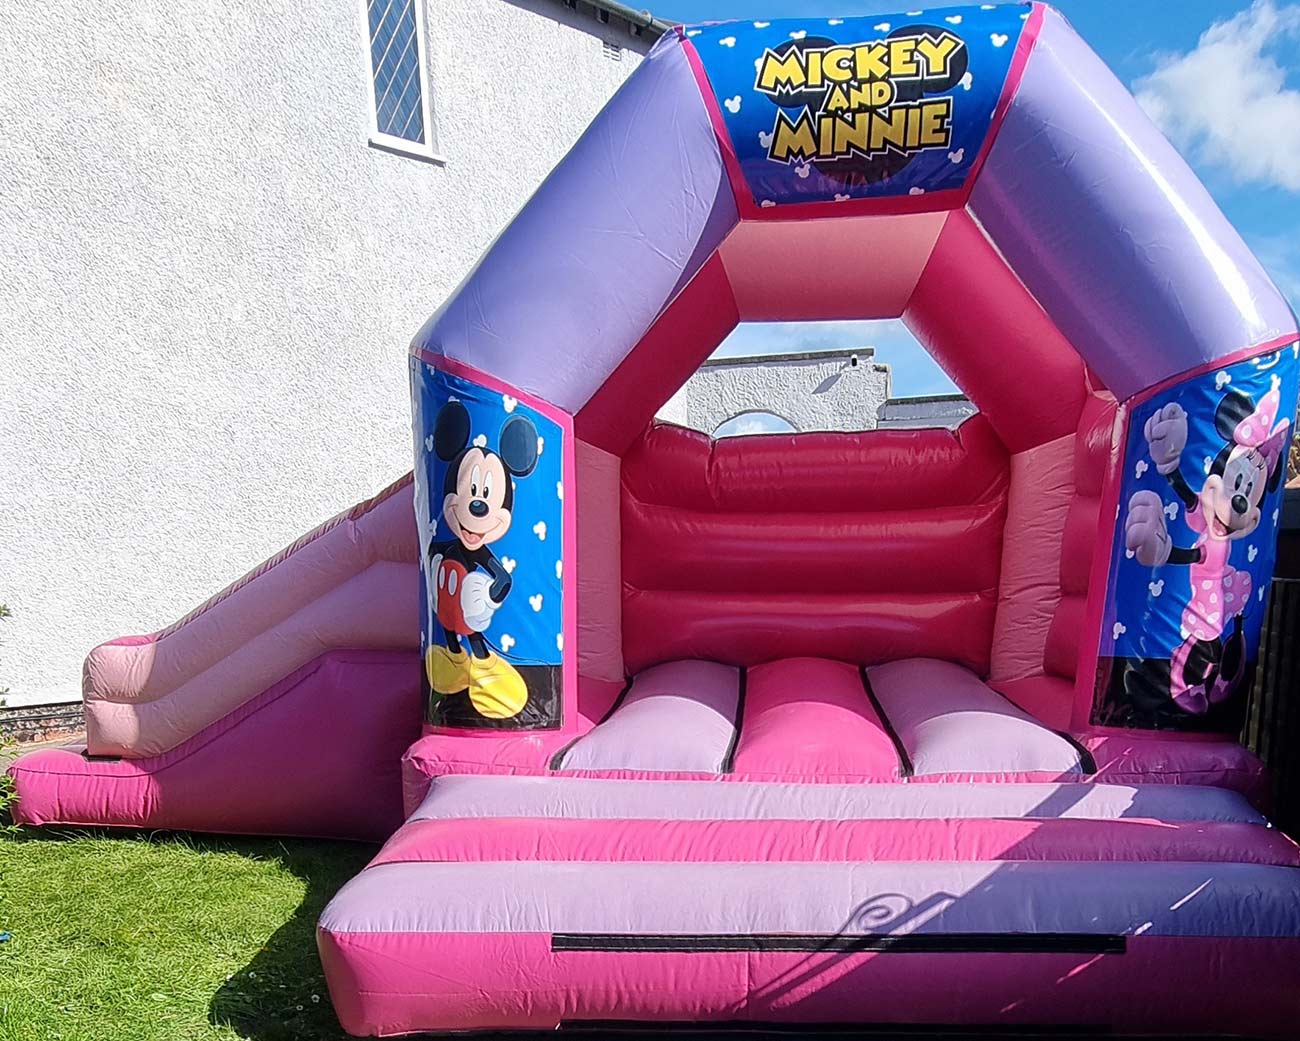 16x14 Mickey and Minnie Slide Castle